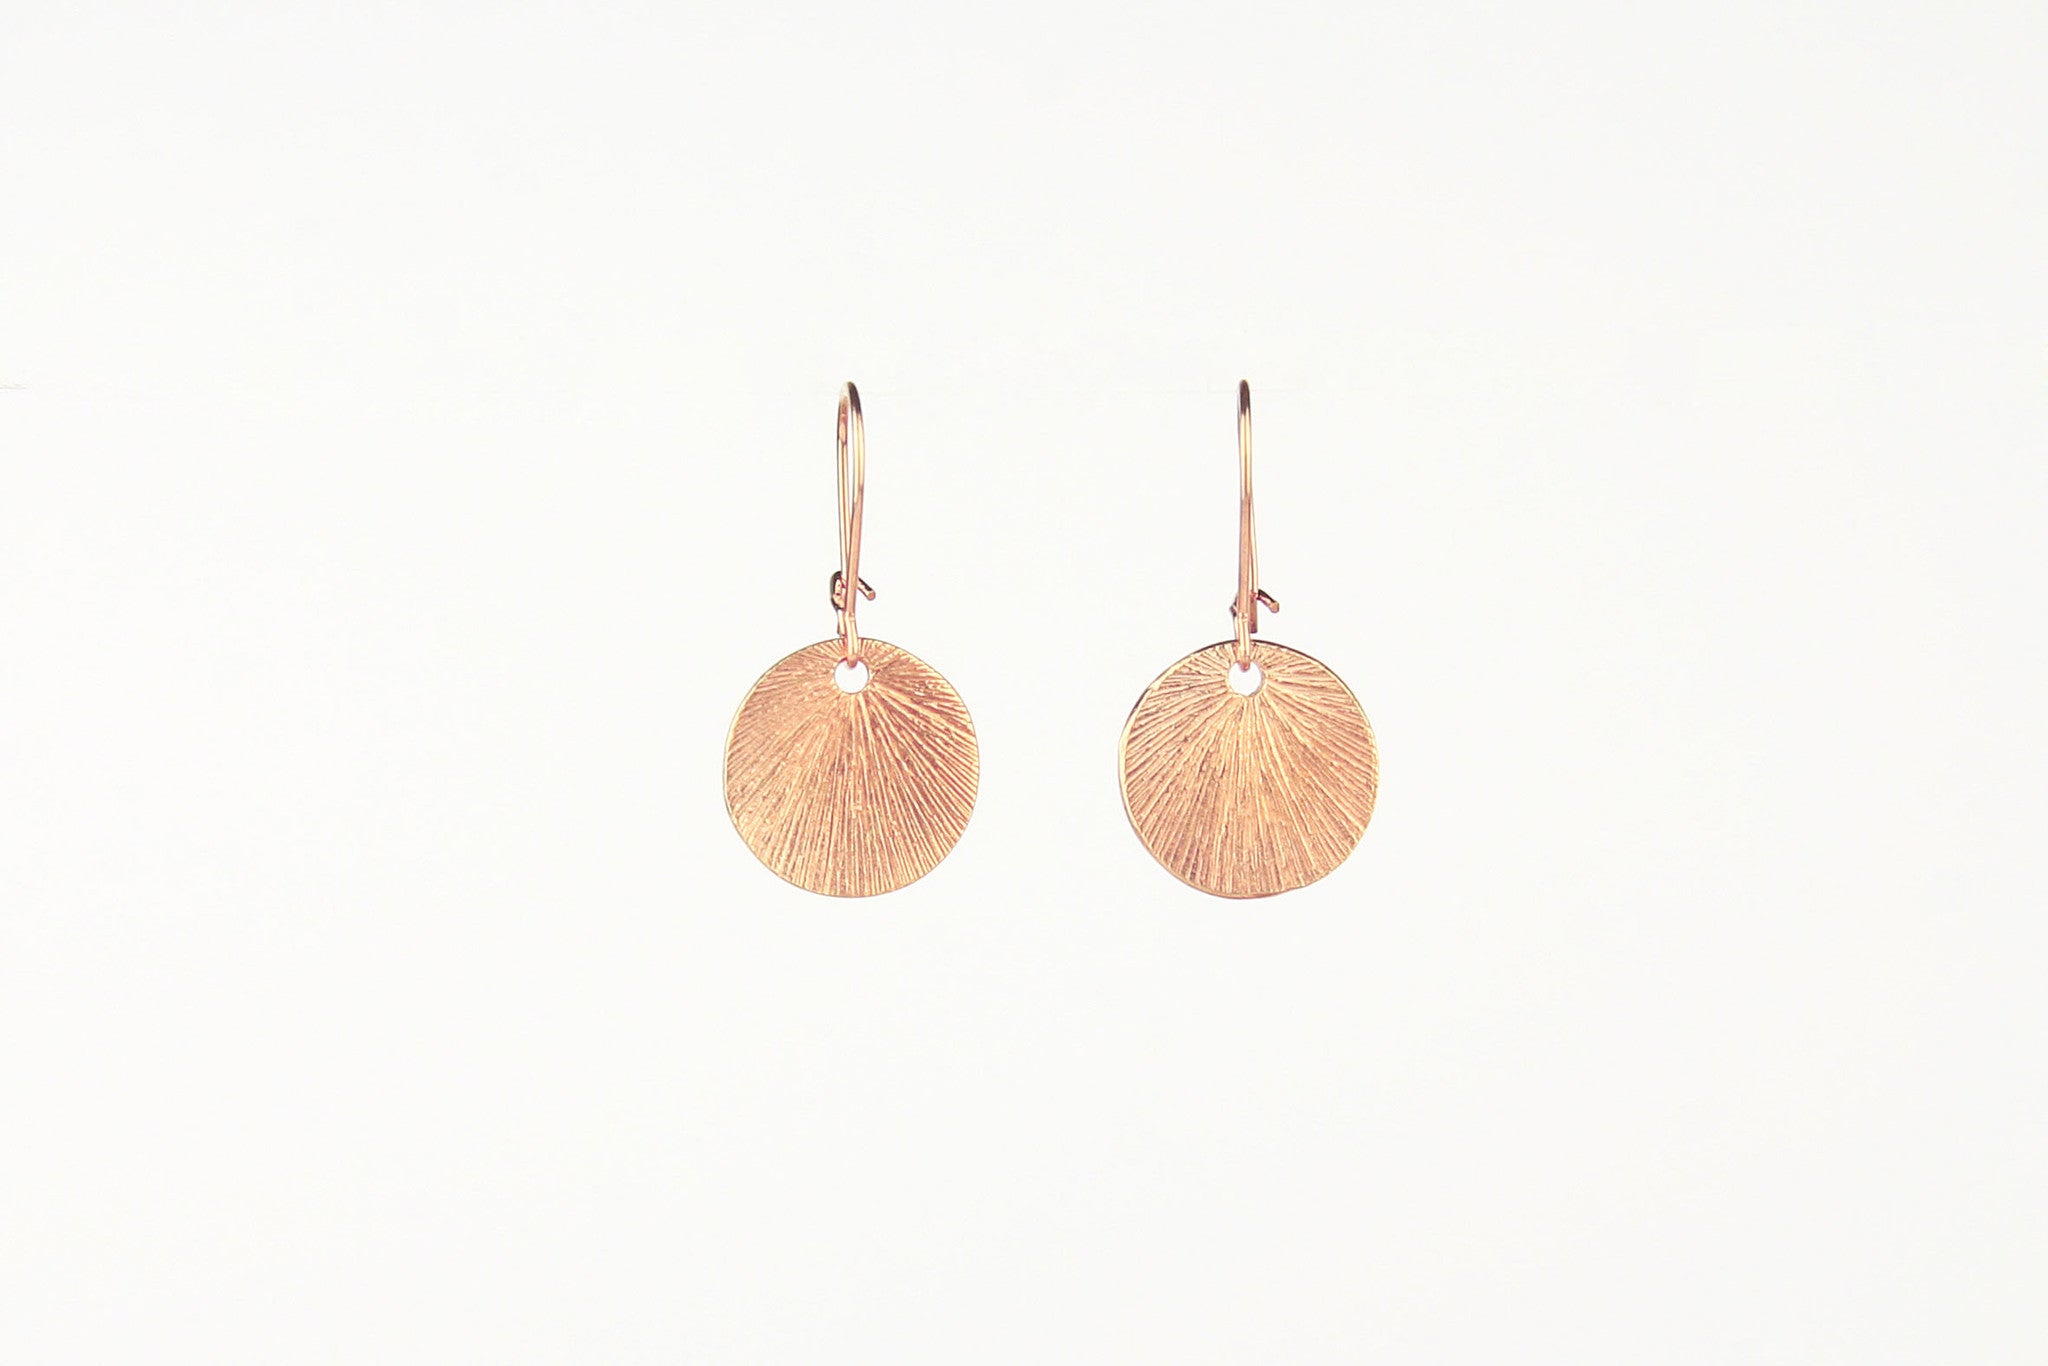 jewelberry ohrringe earrings medium shell rose gold plated sterling silver fine jewelry handmade with love fairtrade